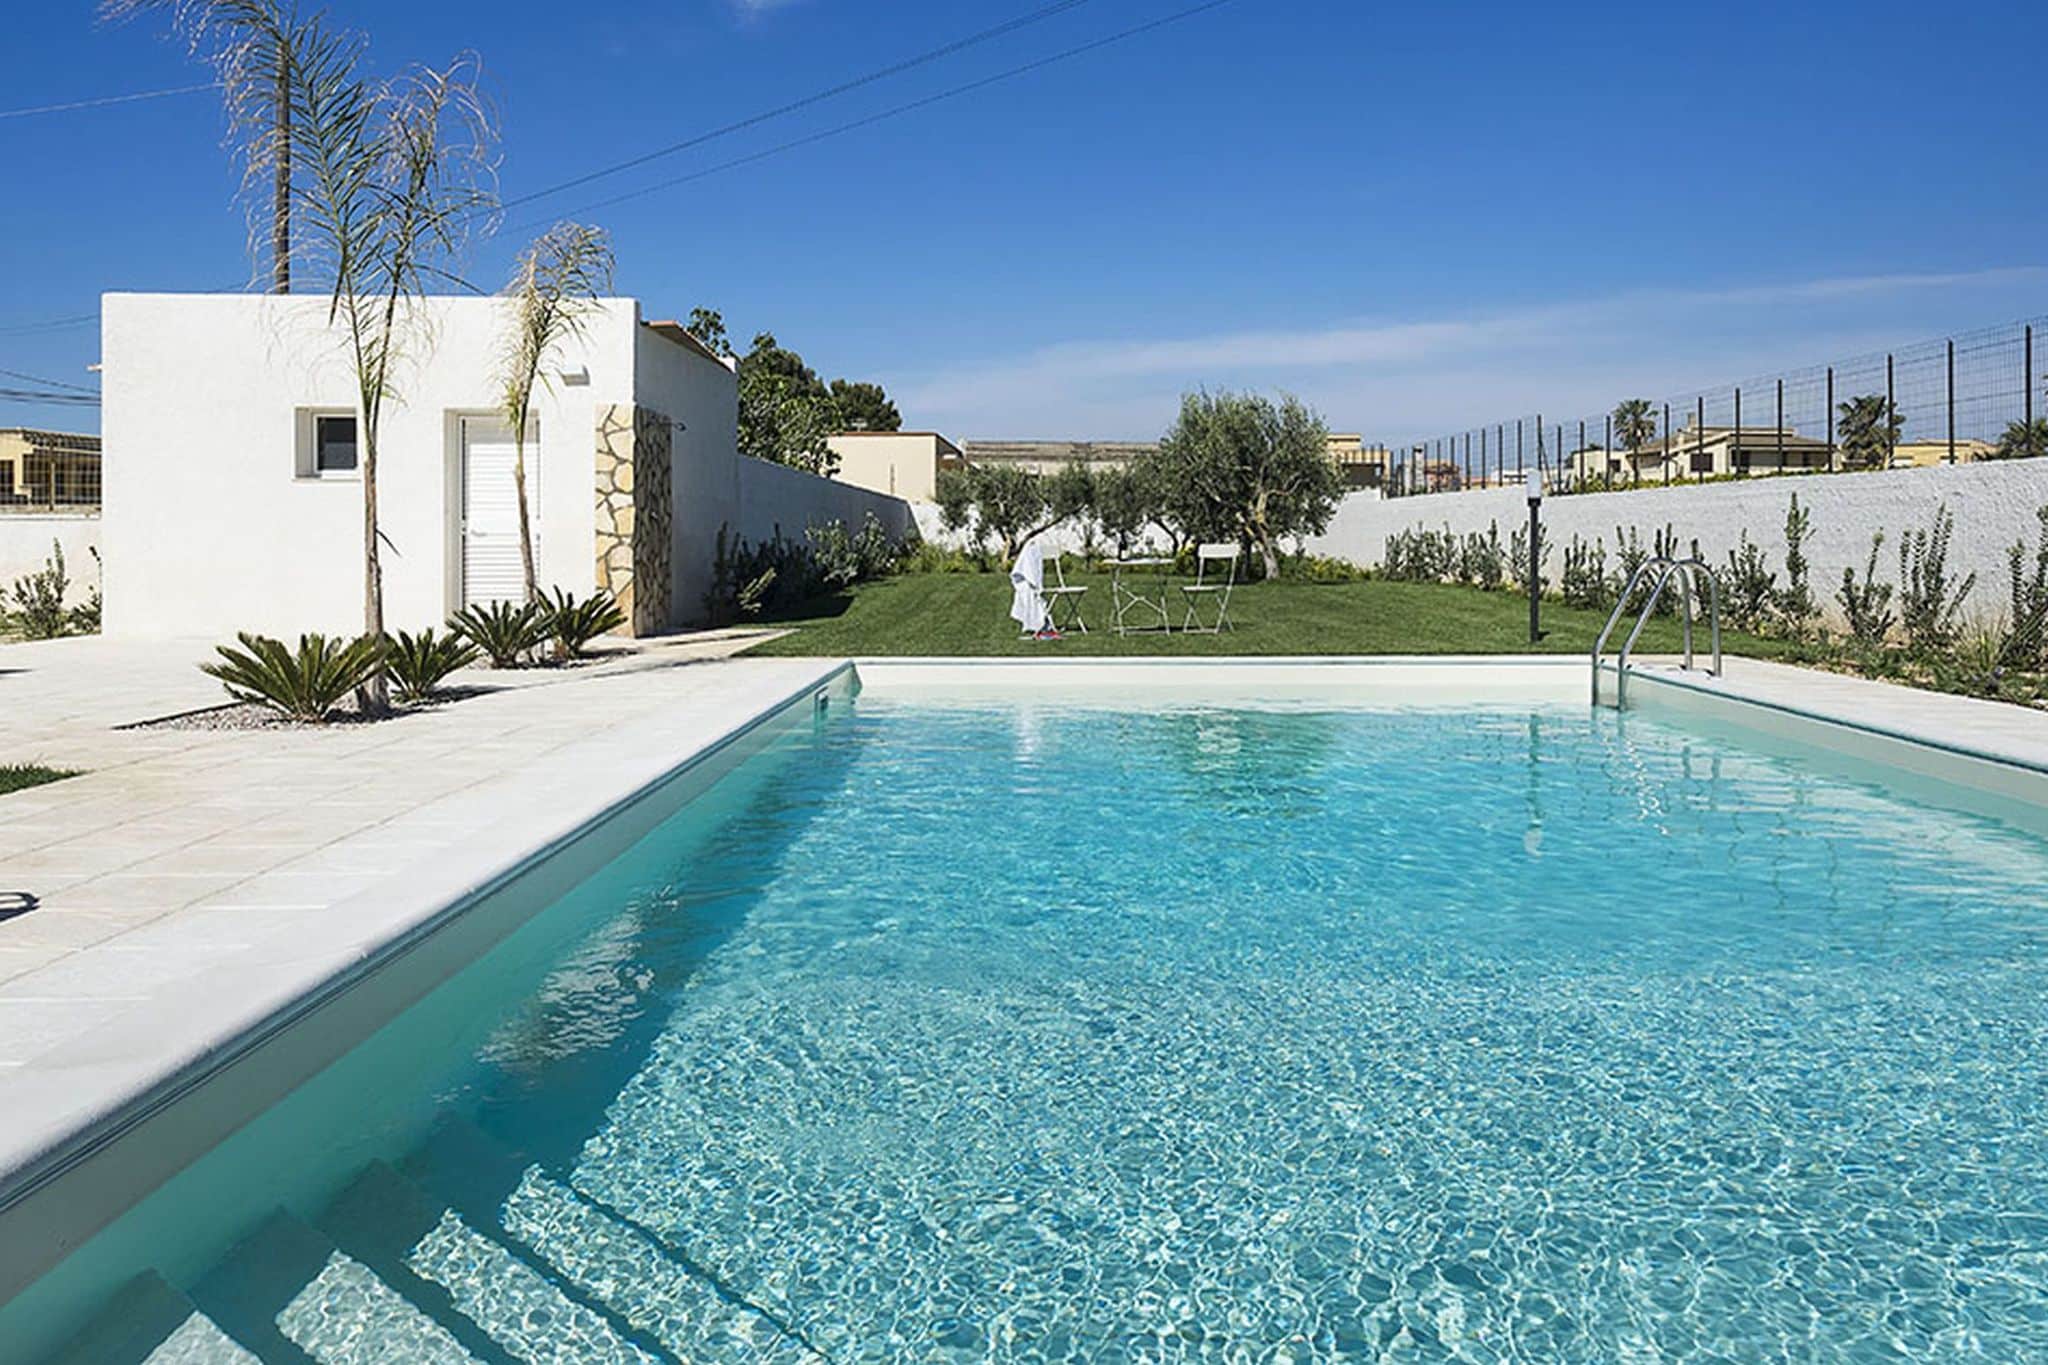 Luxury villa in Marsala with pool and private garden and only 400m from the sea